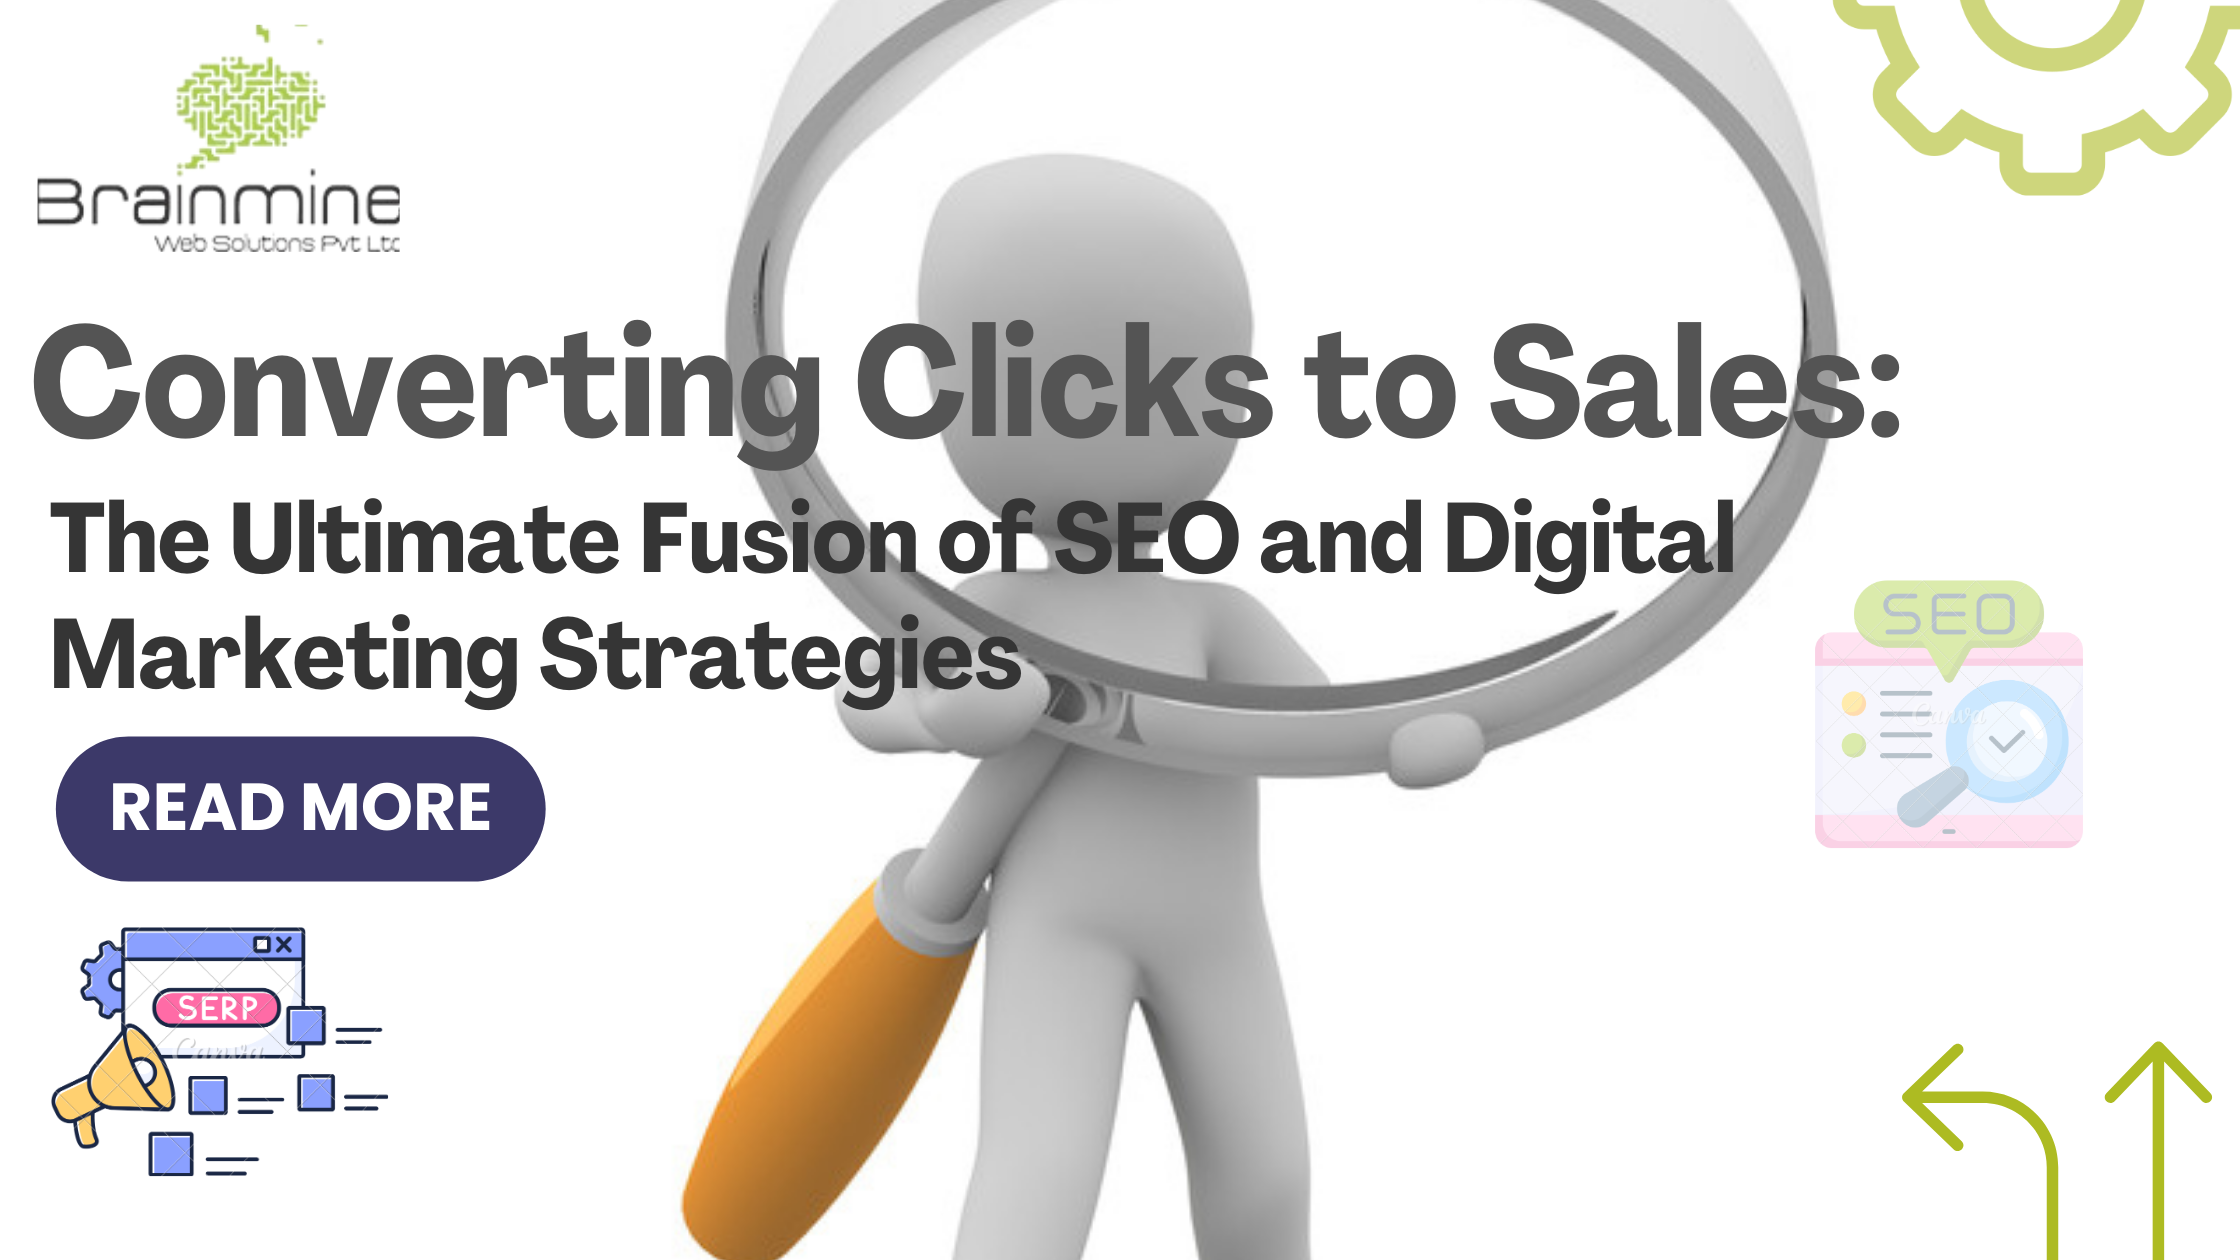 Converting Clicks to Sales The Ultimate Fusion of SEO and Digital Marketing Strategies